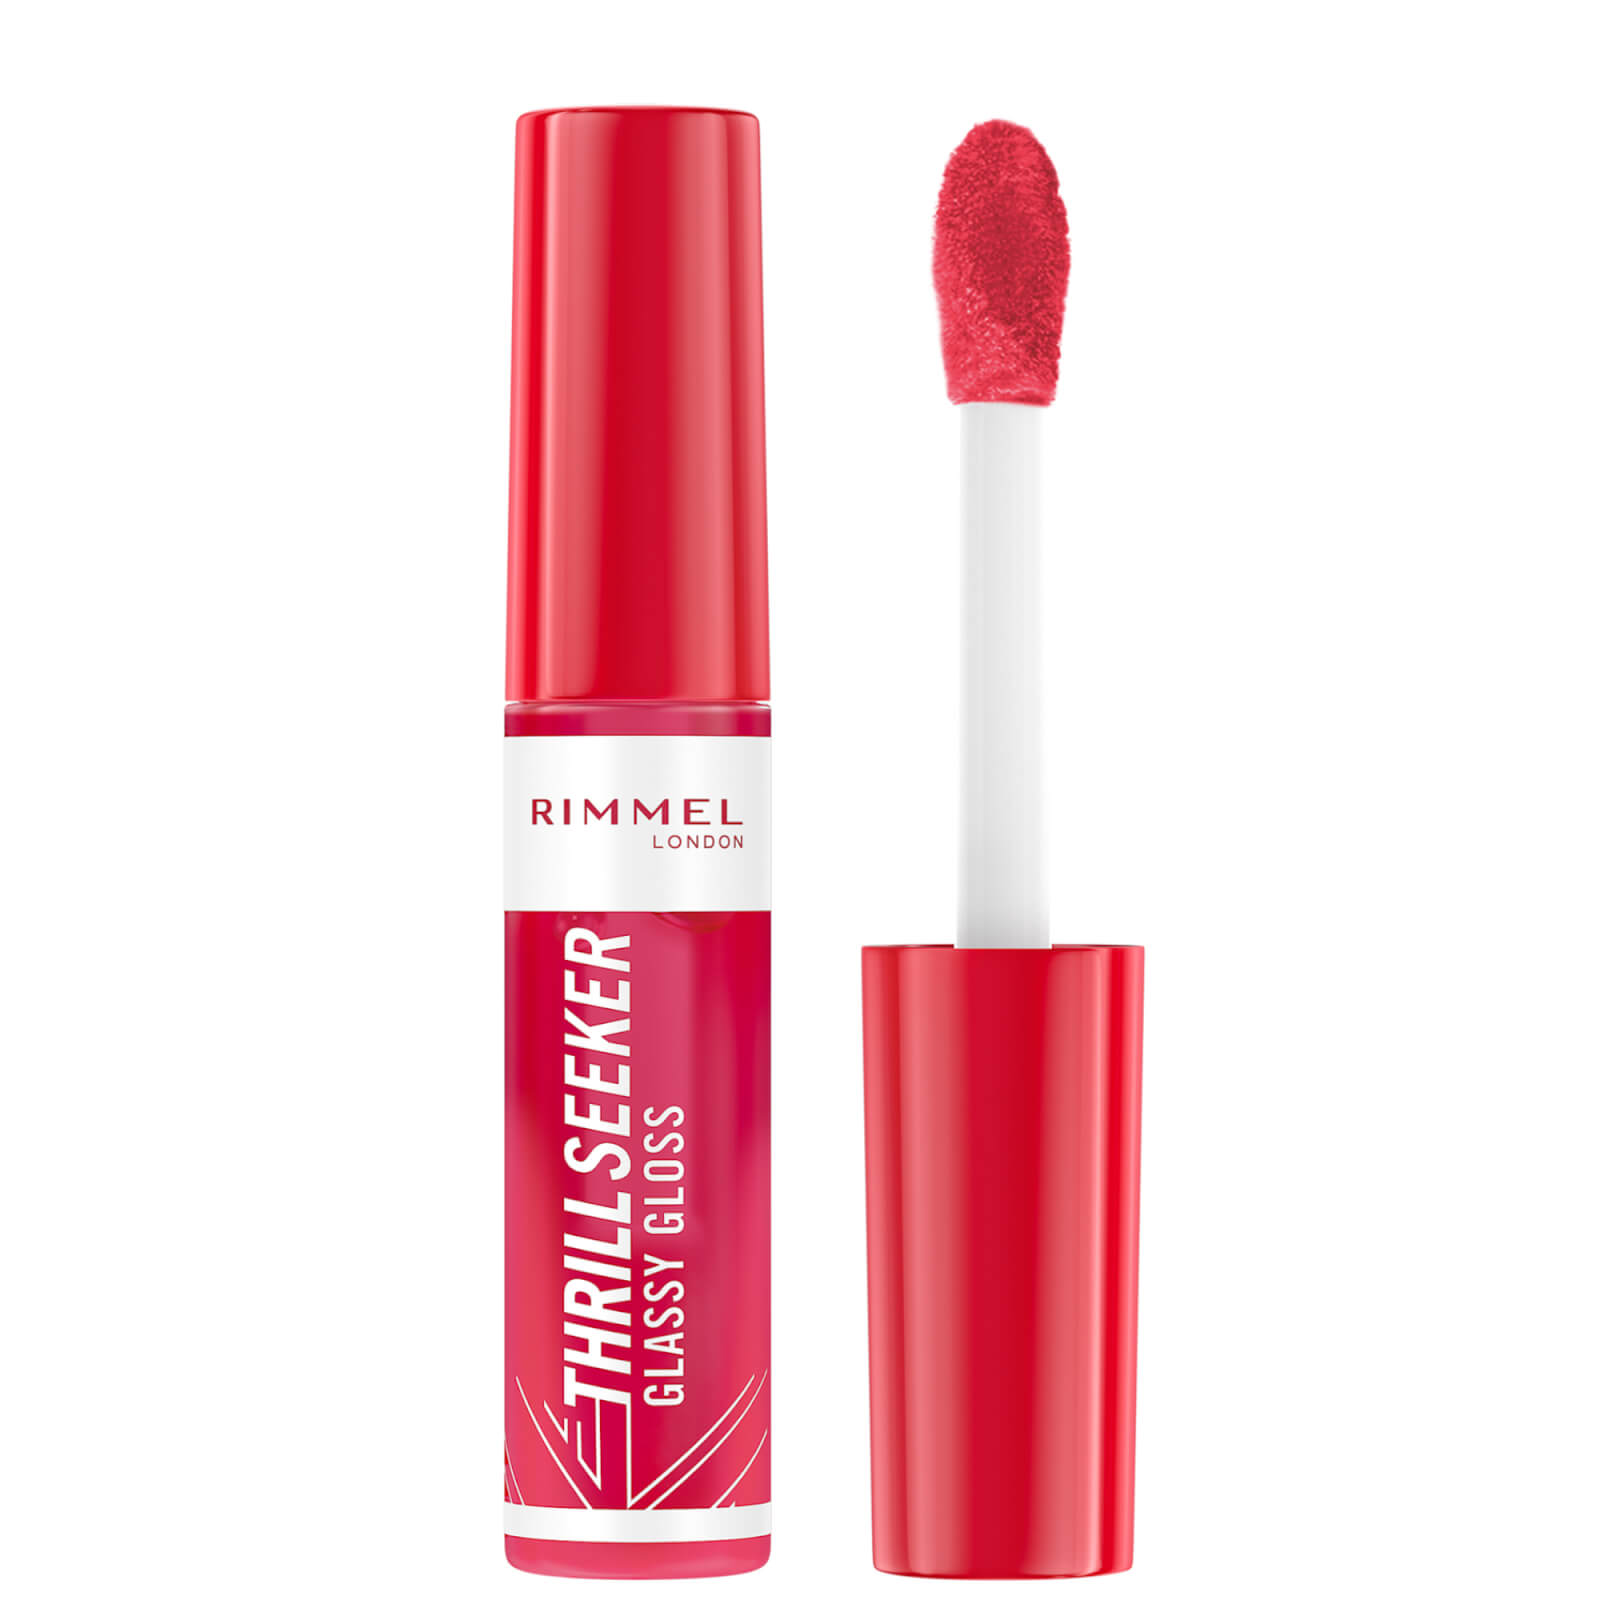 Image of Rimmel London Thrill Seeker Glassy Lip Gloss 10ml (Various Shades) - 350 Pink to the Berry